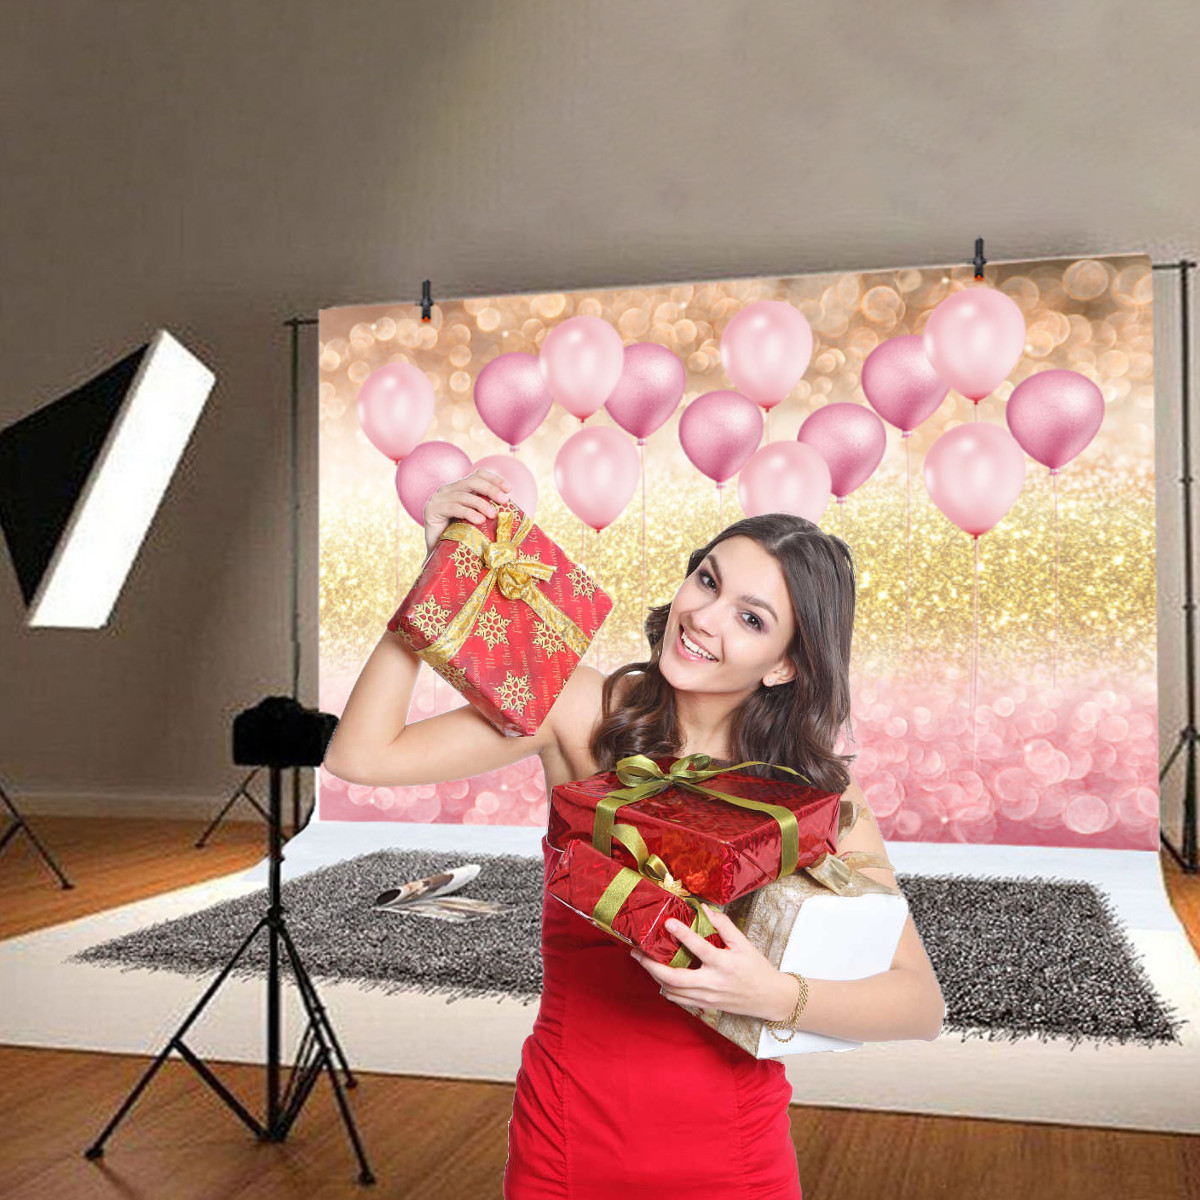 Little-Baby-Birthday-Party-Theme-Backdrops-Photography-Photo-Booth-Studio-Background-Party-Home-Deco-1748939-12